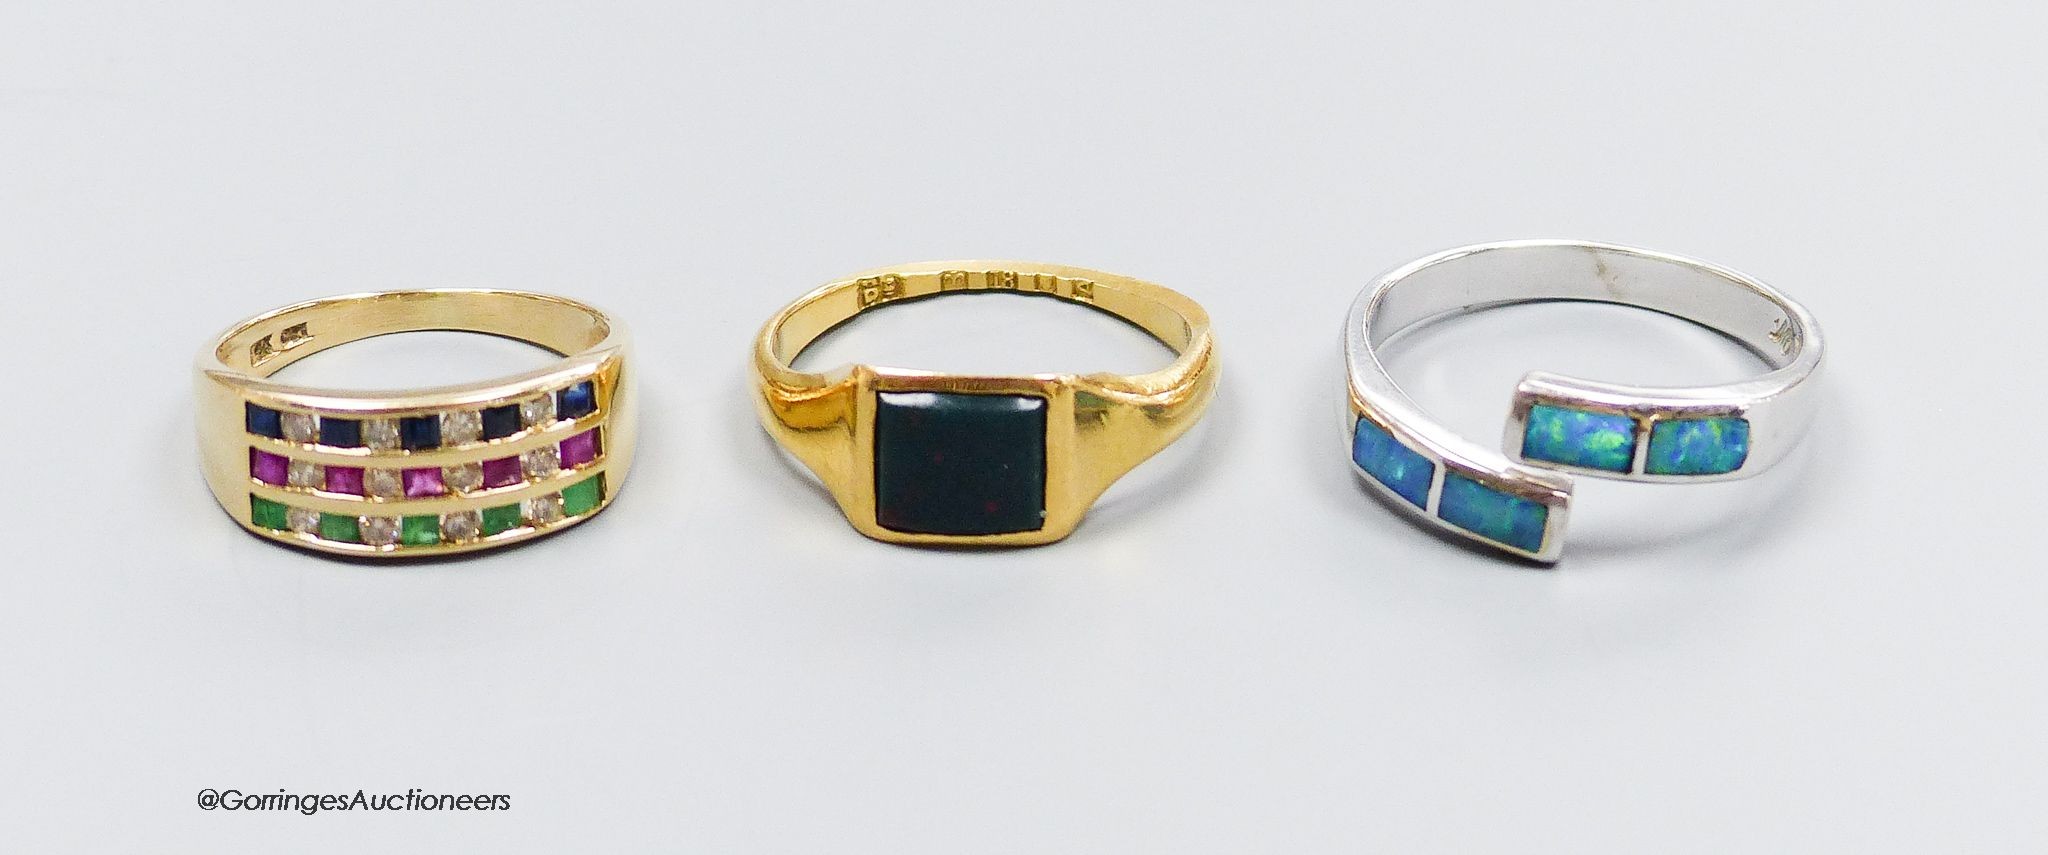 An 18ct white gold and opal ring, size Q, gross 4g, an 18ct gold and bloodstone ring, size O, gross 3g, and a 14k gold, sapphire, emerald, ruby and diamond ring, size L, gross 3g.